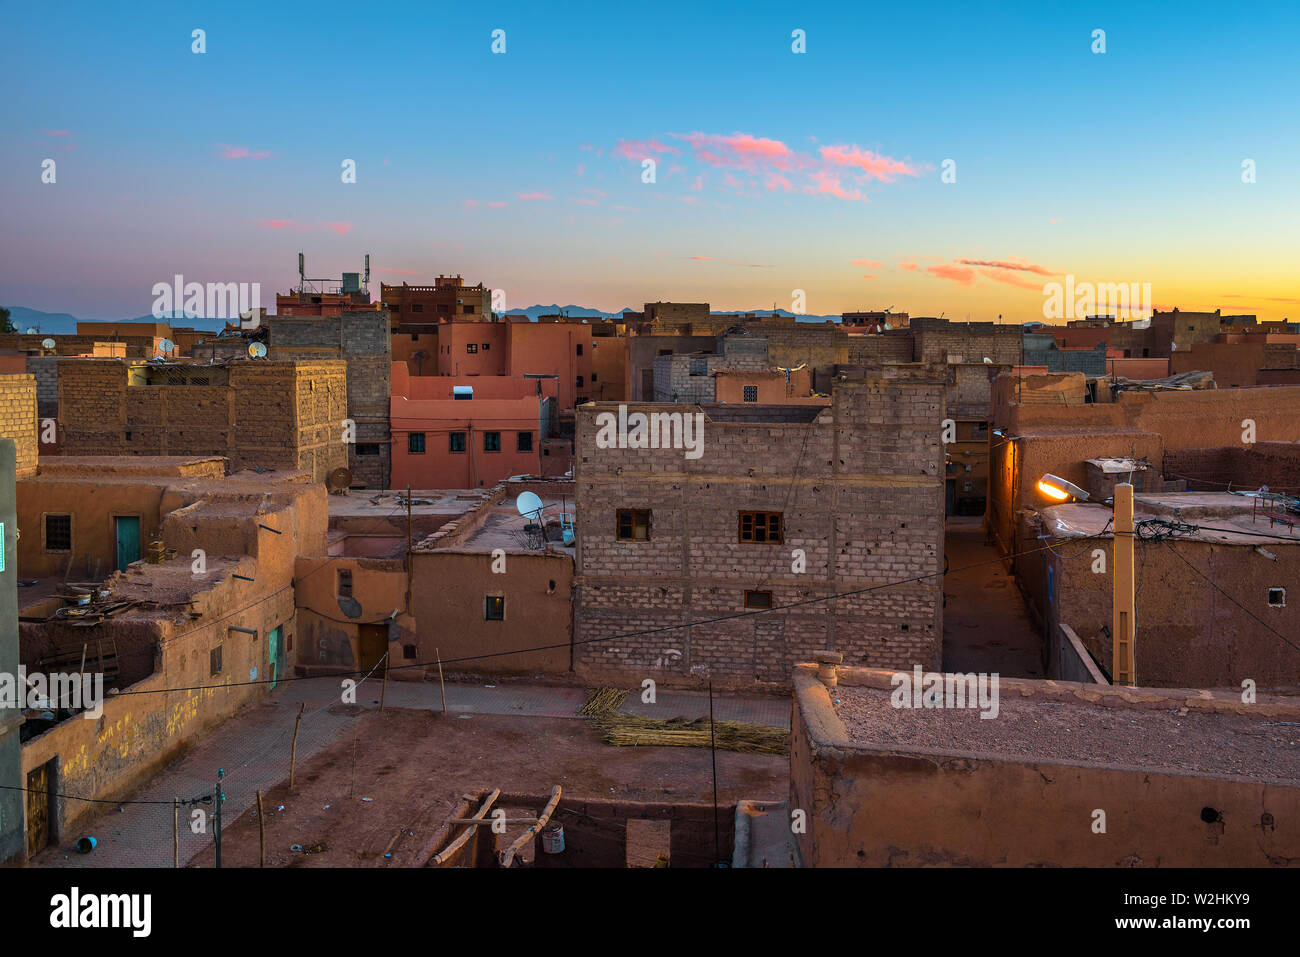 Sunrise over the roofs of Ouarzazate in Morocco Stock Photo